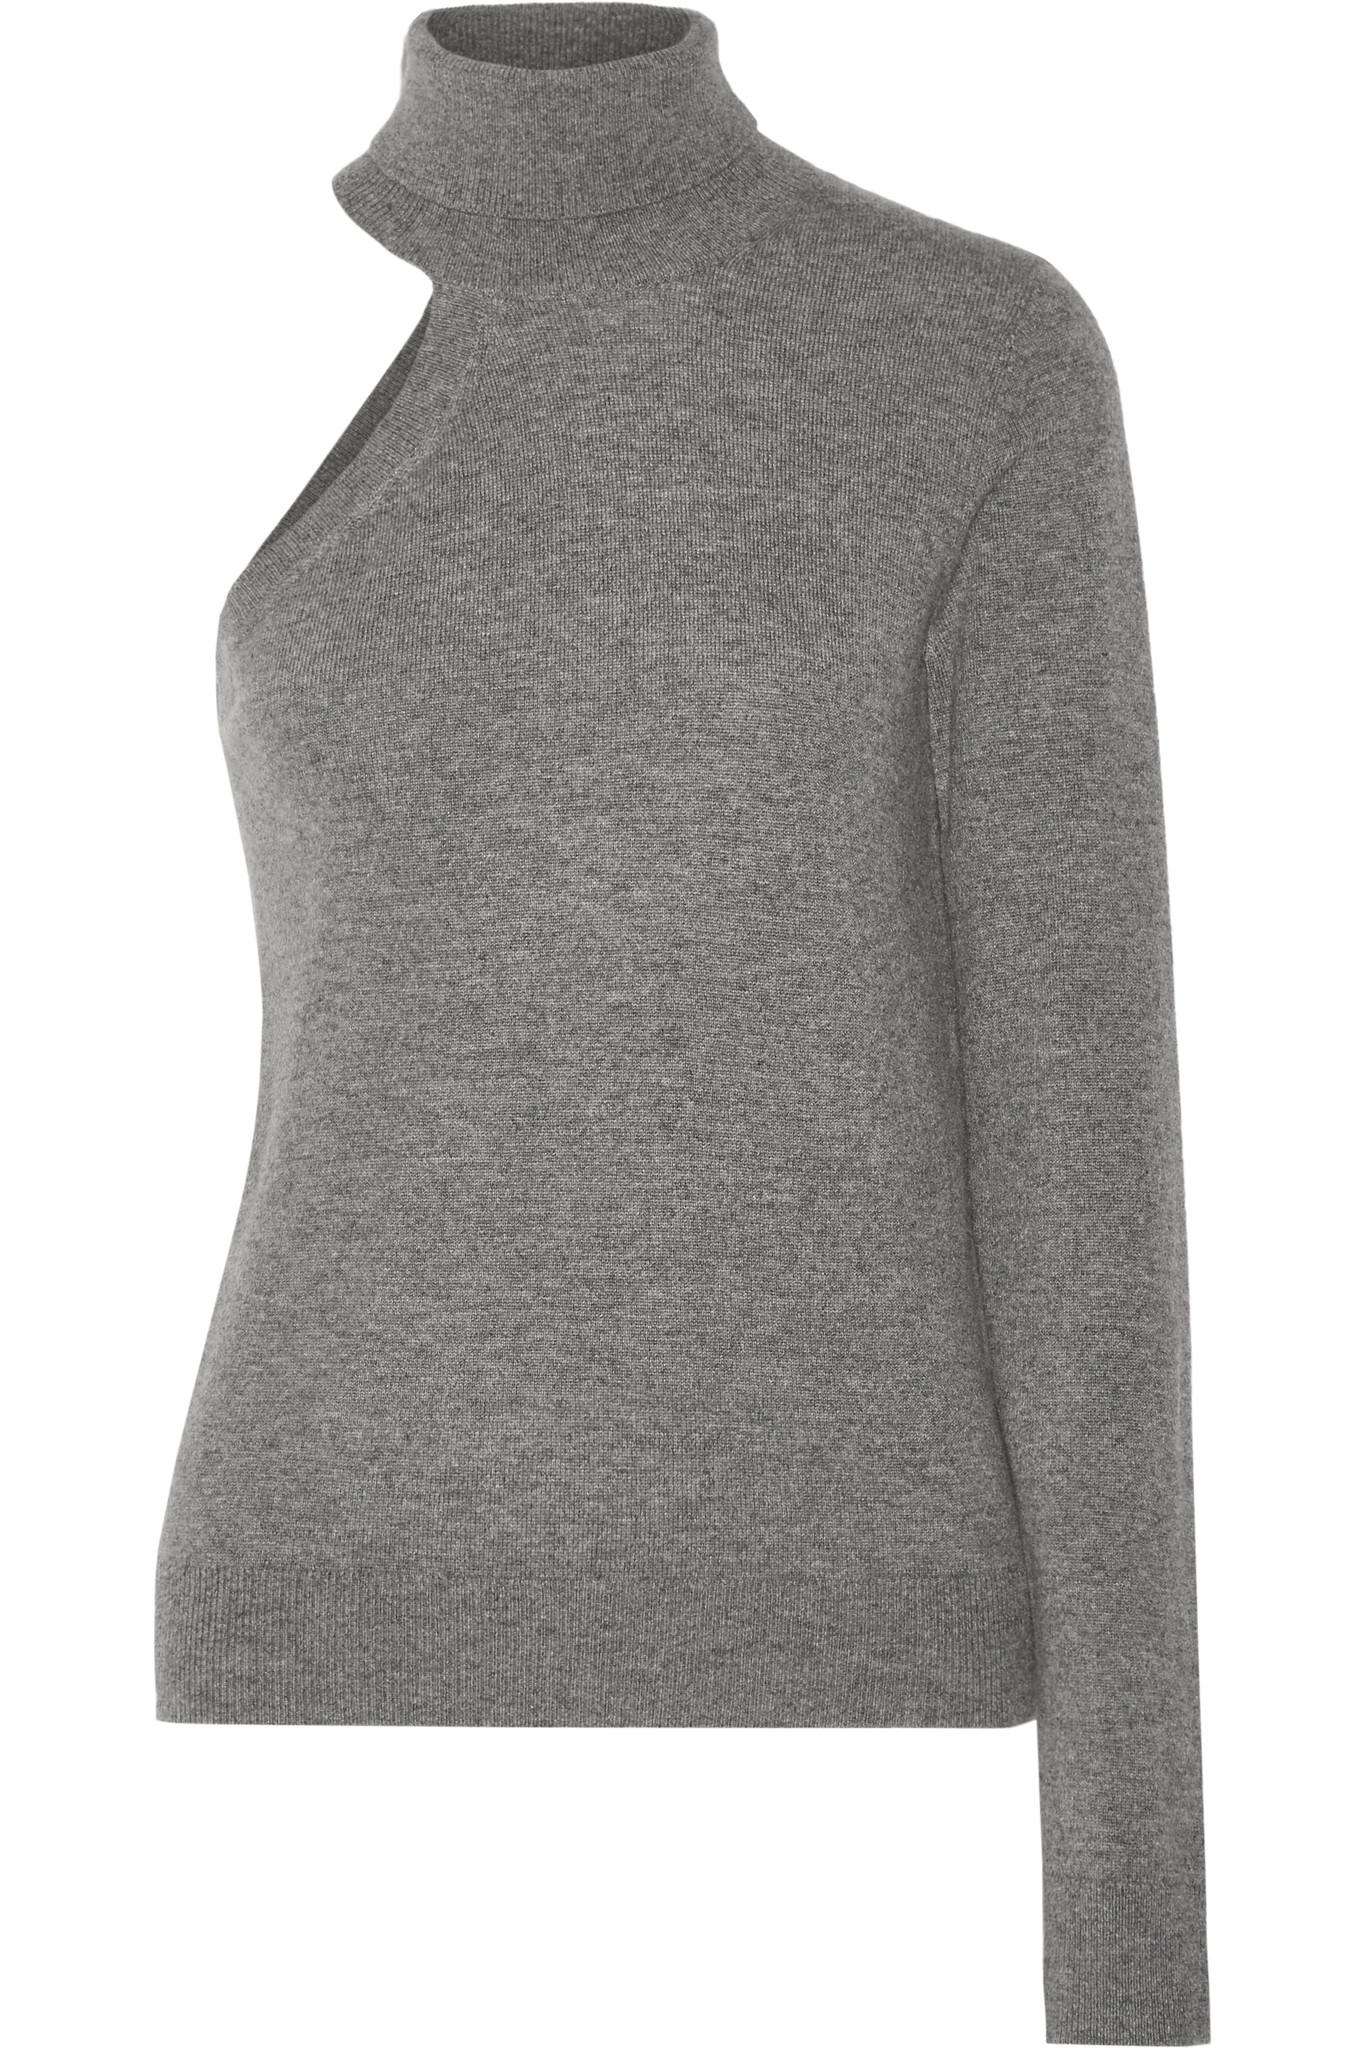 Michael Kors One-shoulder Cashmere Turtleneck Sweater in Gray | Lyst